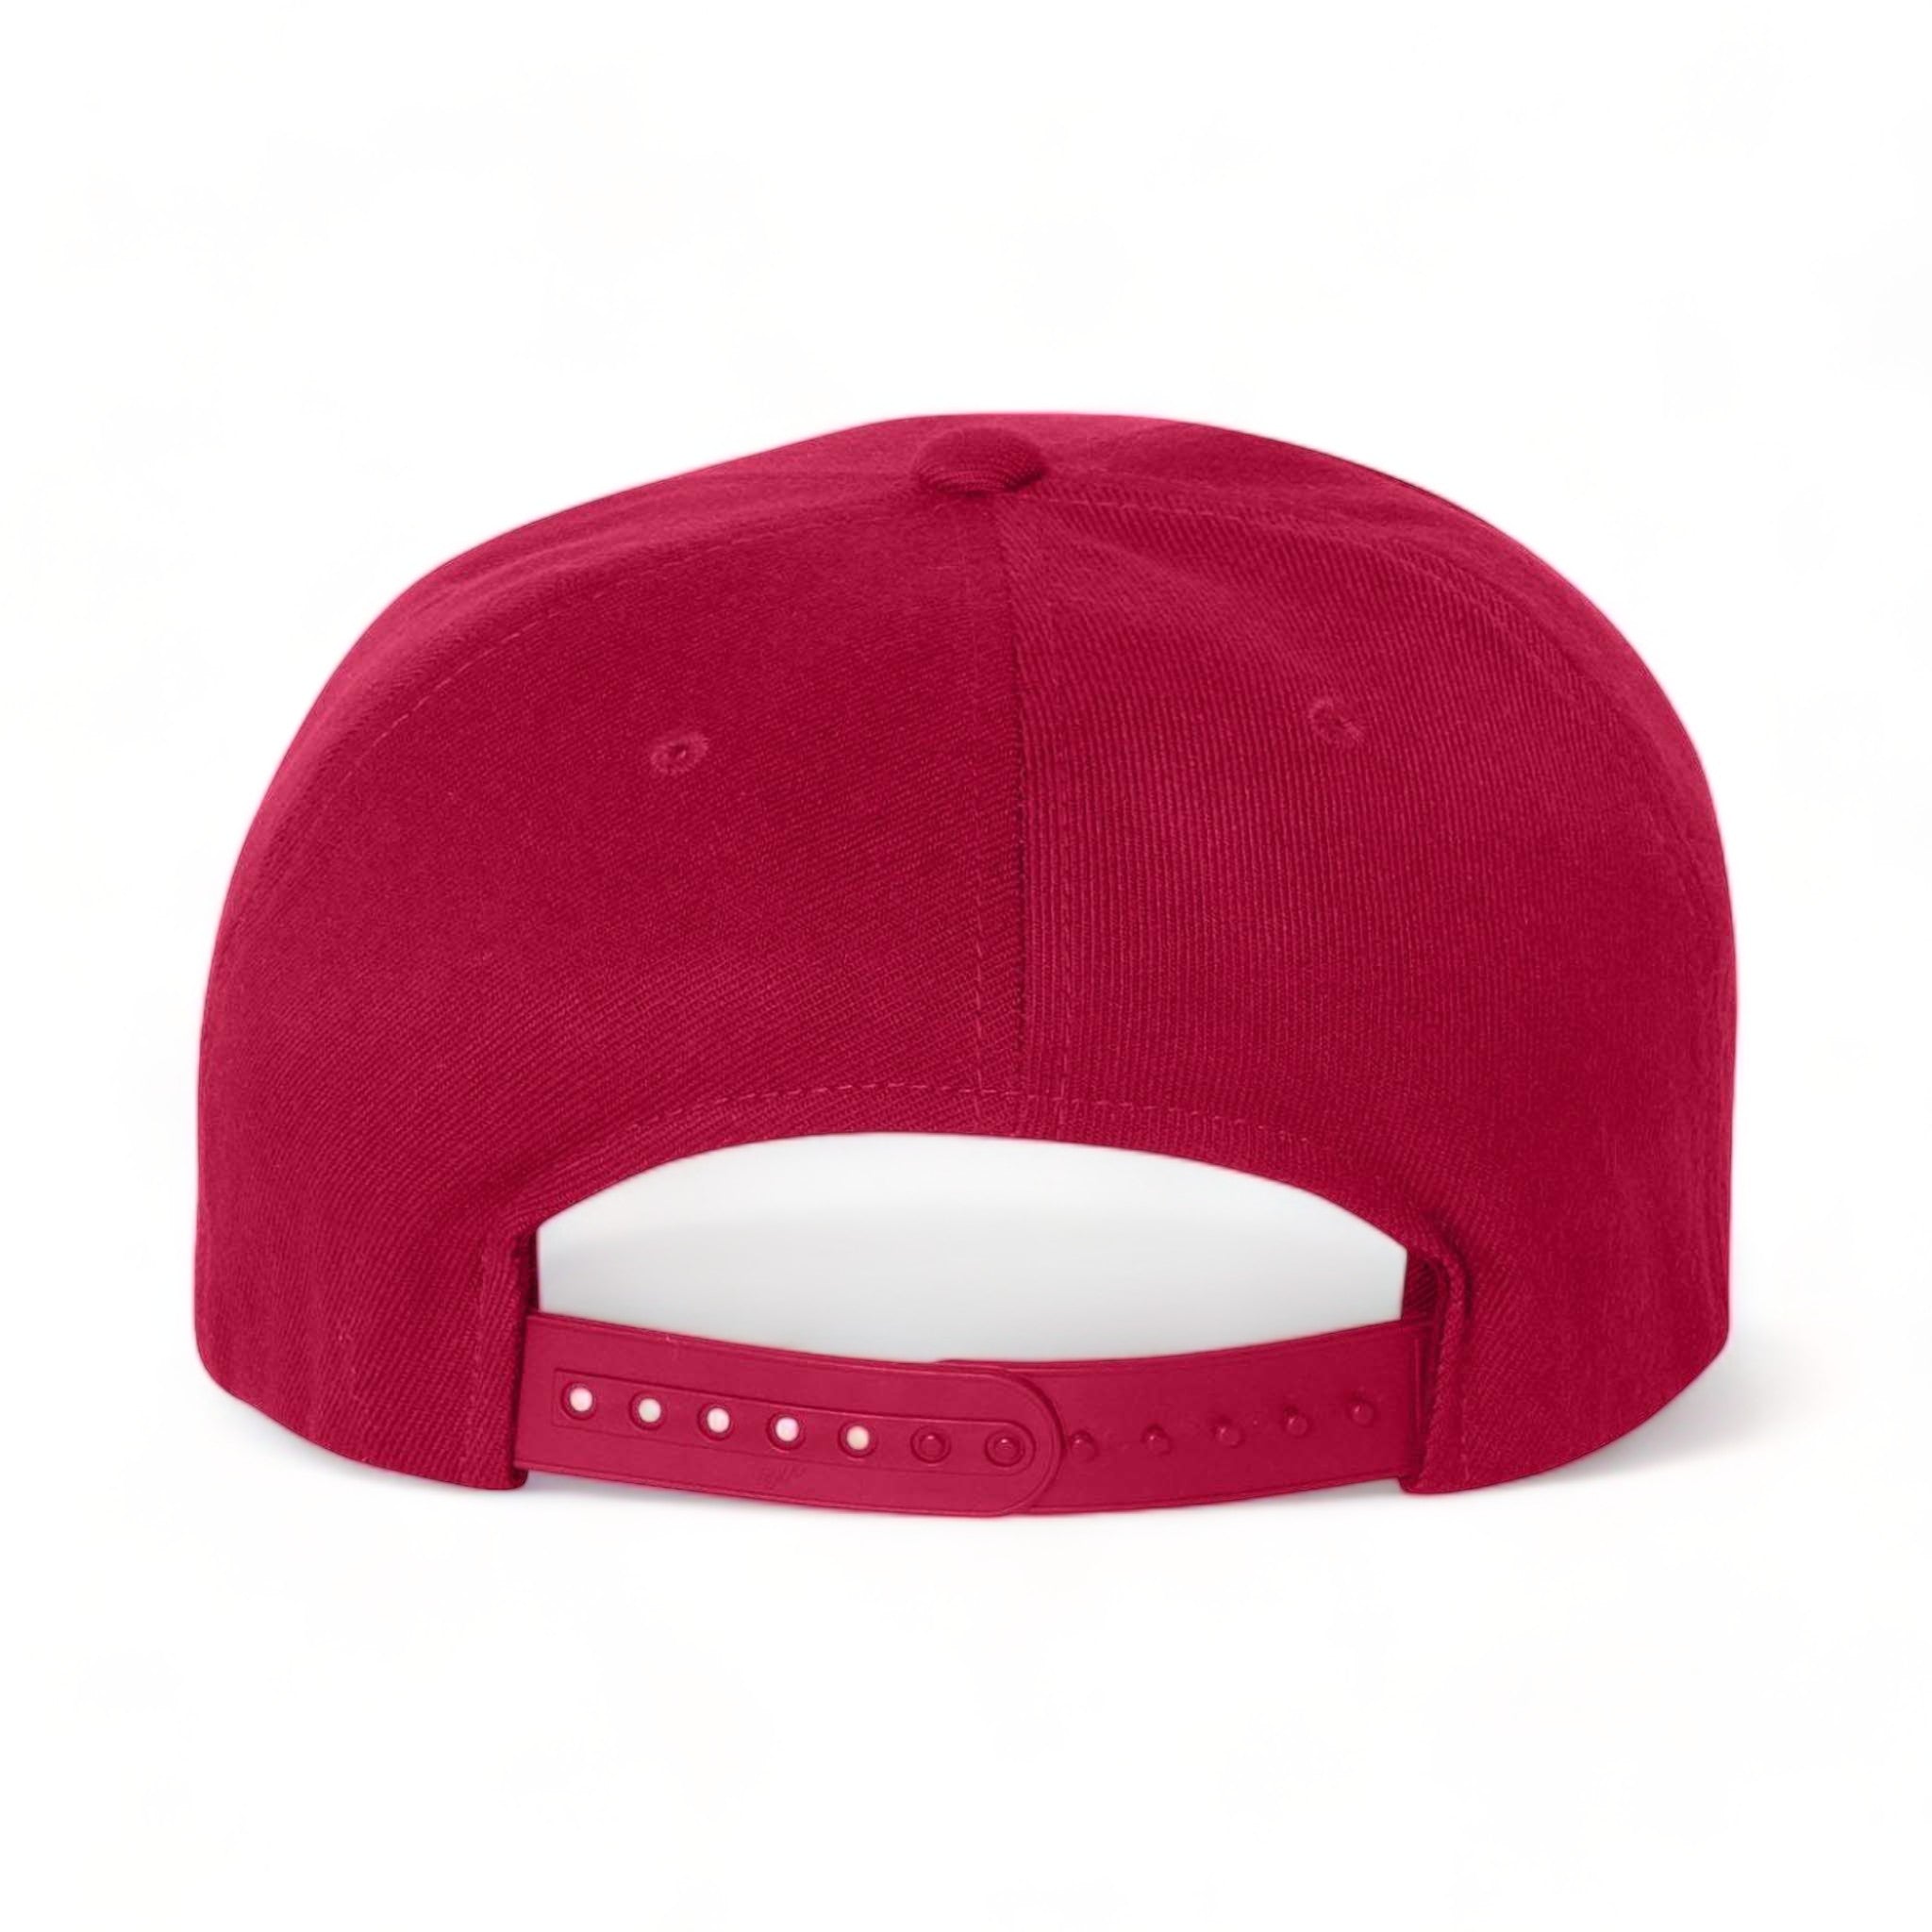 Back view of Flexfit 110F custom hat in red